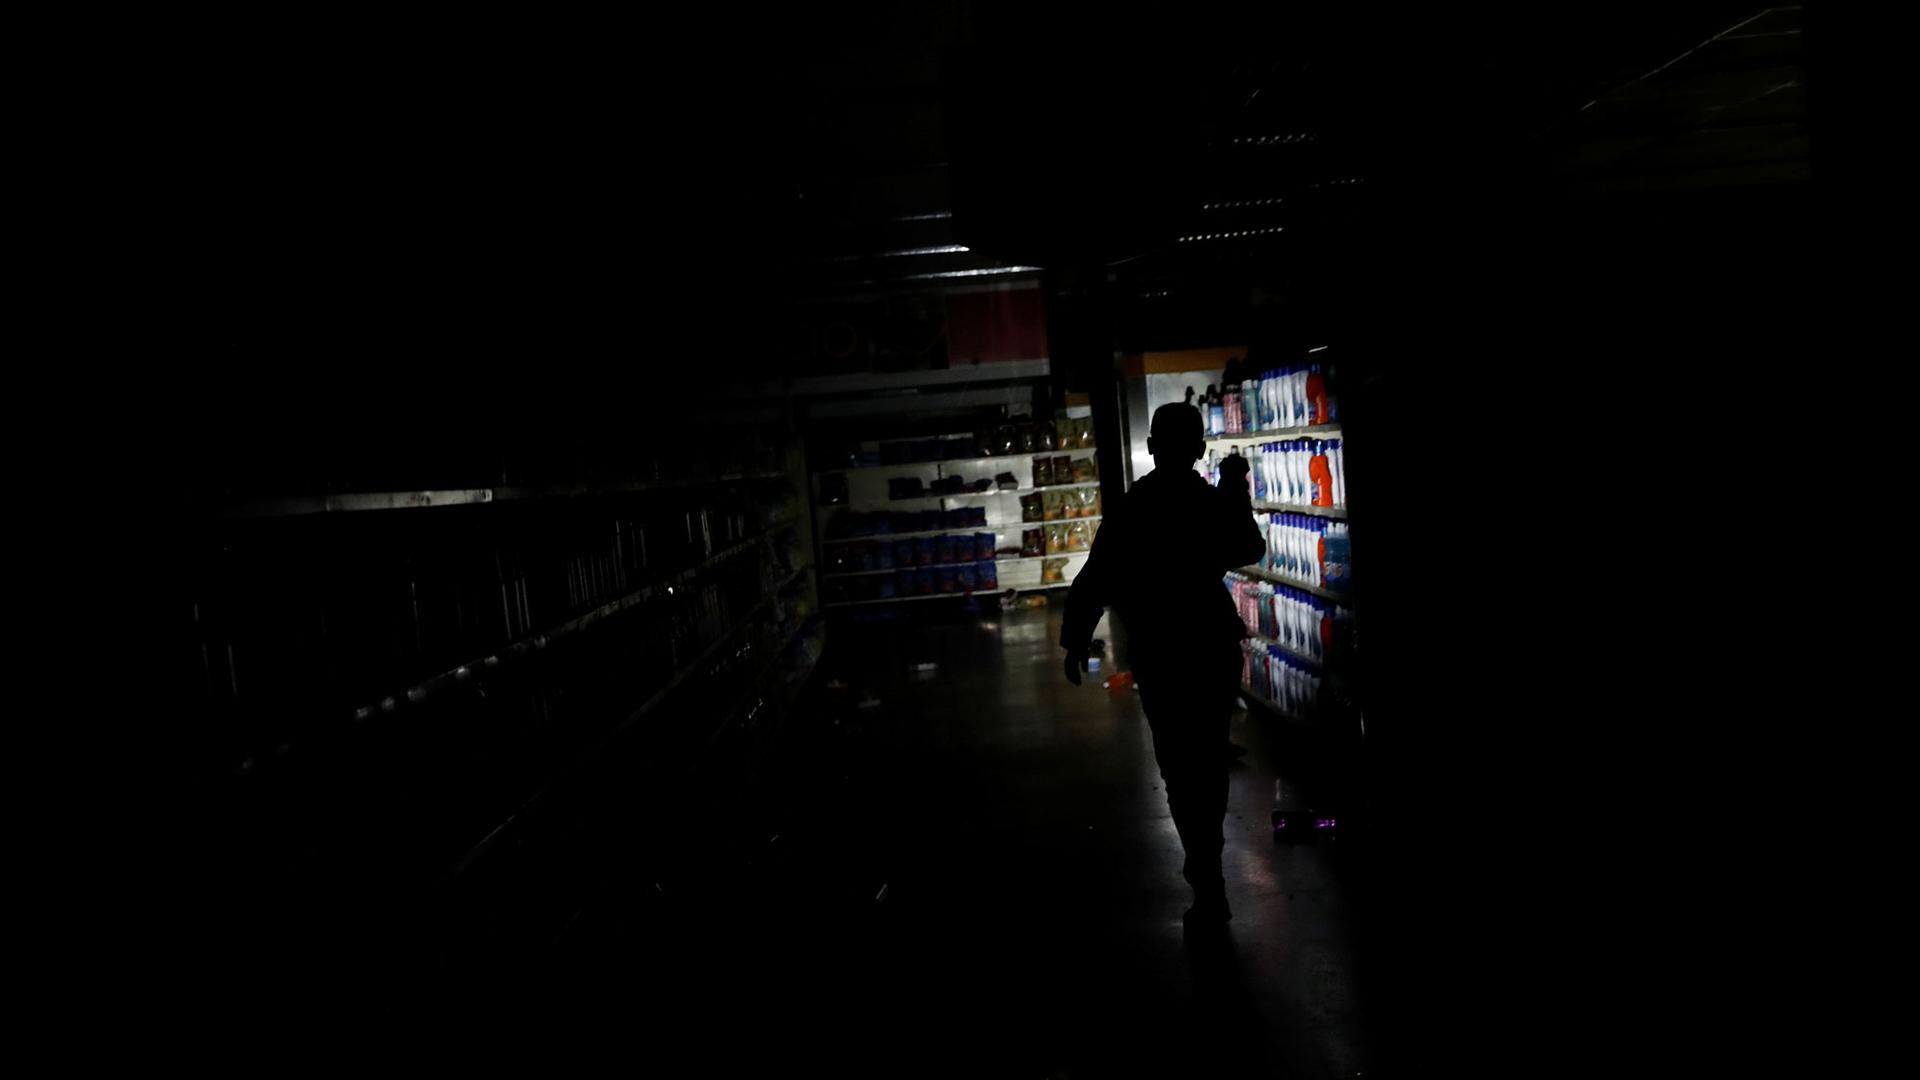 A darkened supermarket is show with one lone flashlight being used by a worker.